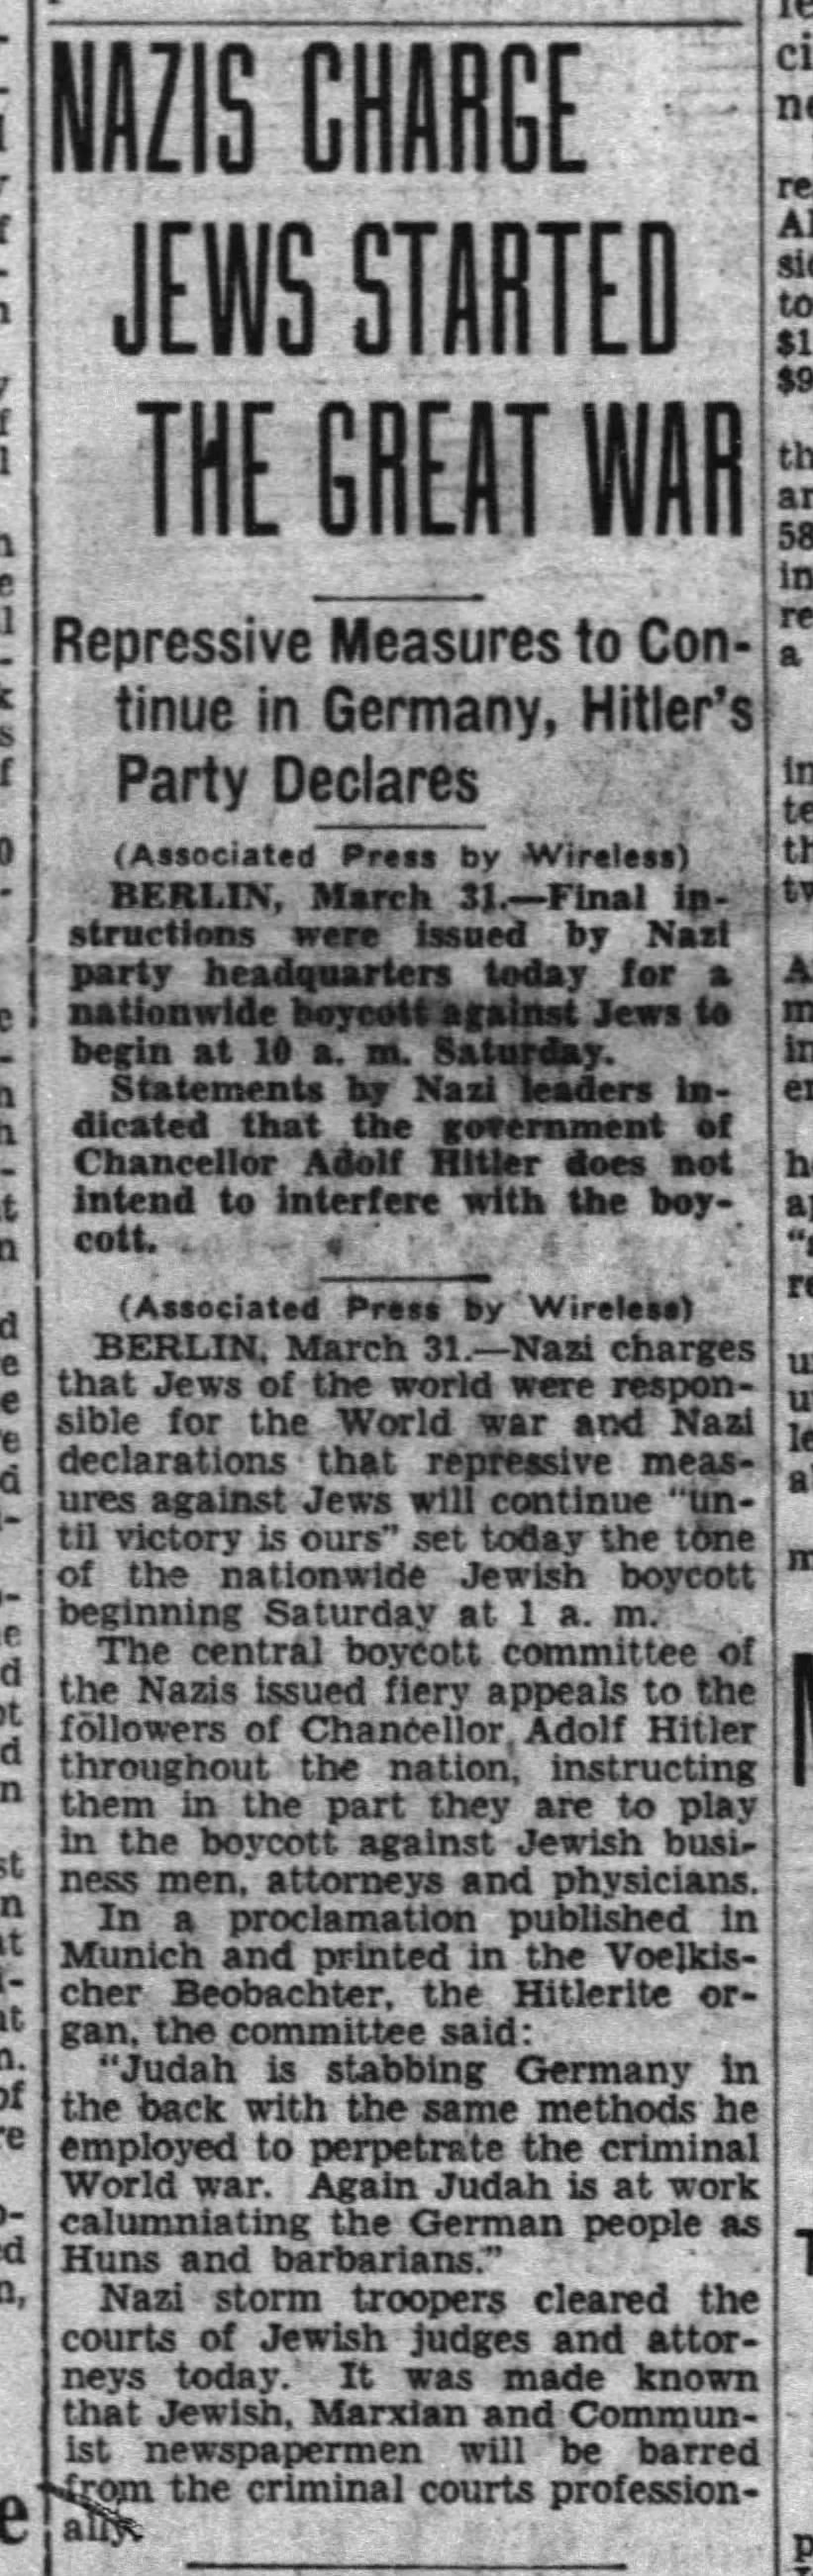 Nazis Charge Jews Started The Great War